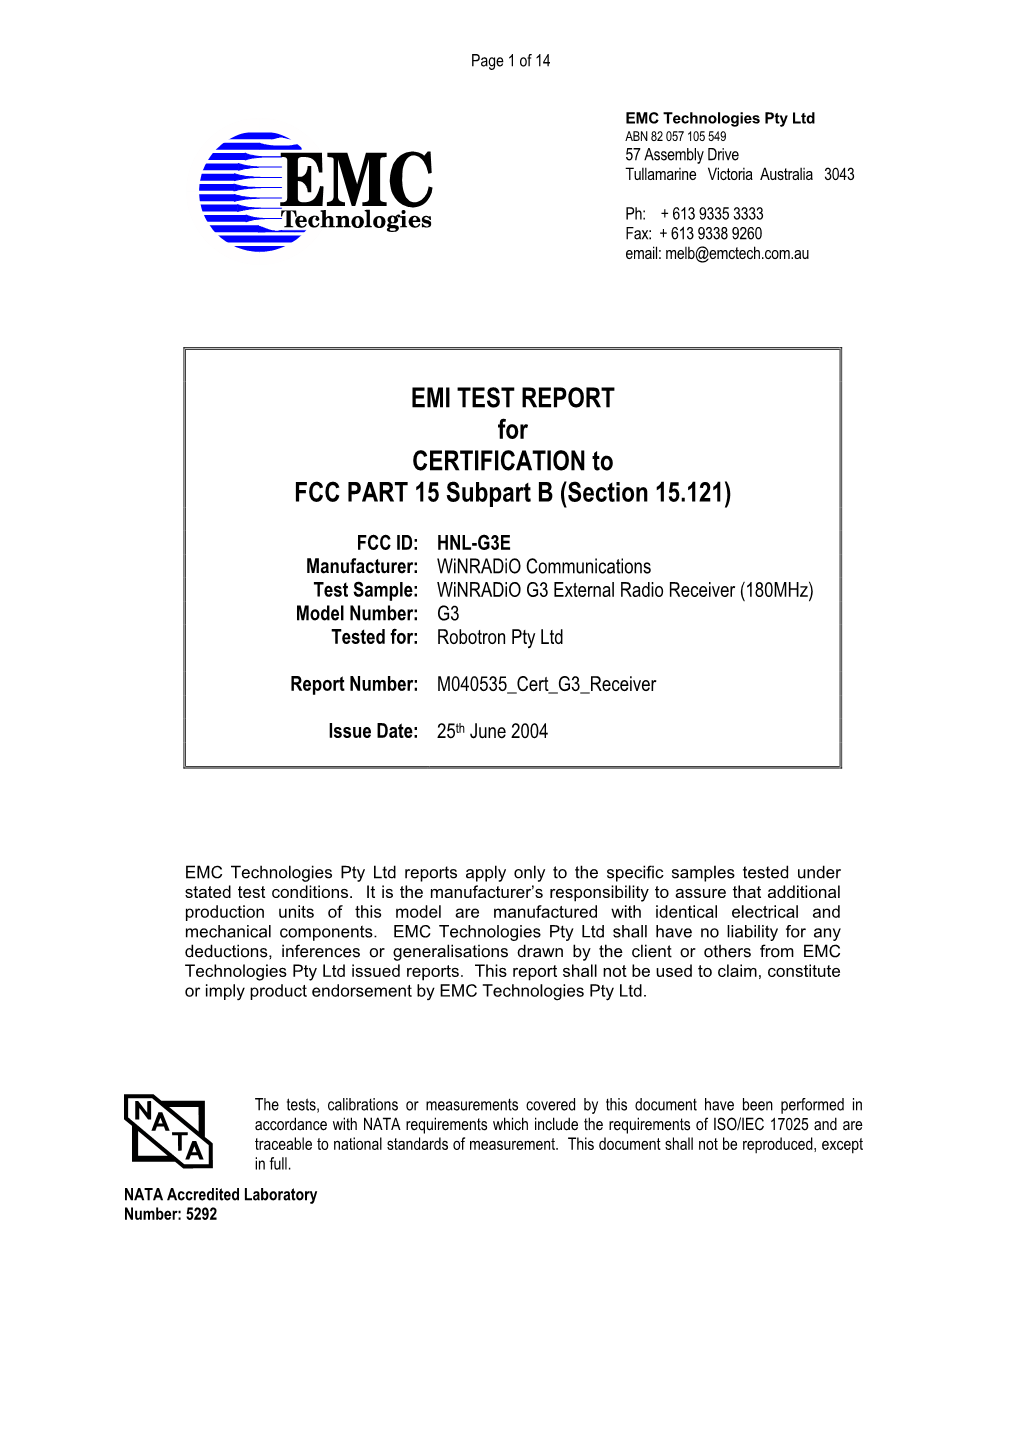 EMI TEST REPORT for CERTIFICATION to FCC PART 15 Subpart B (Section 15.121)